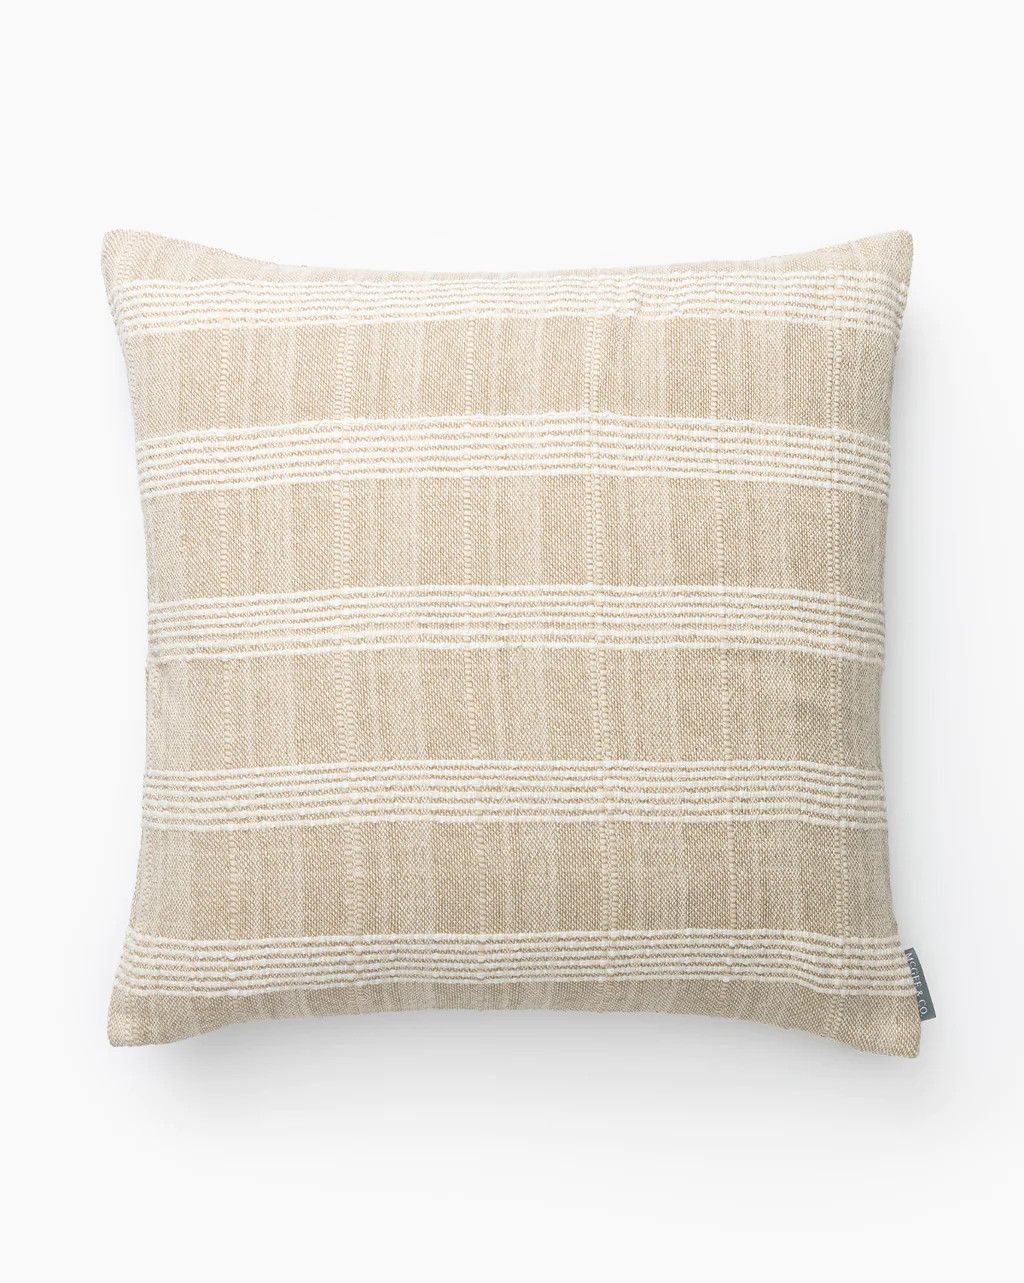 Whitney Pillow Cover | McGee & Co.